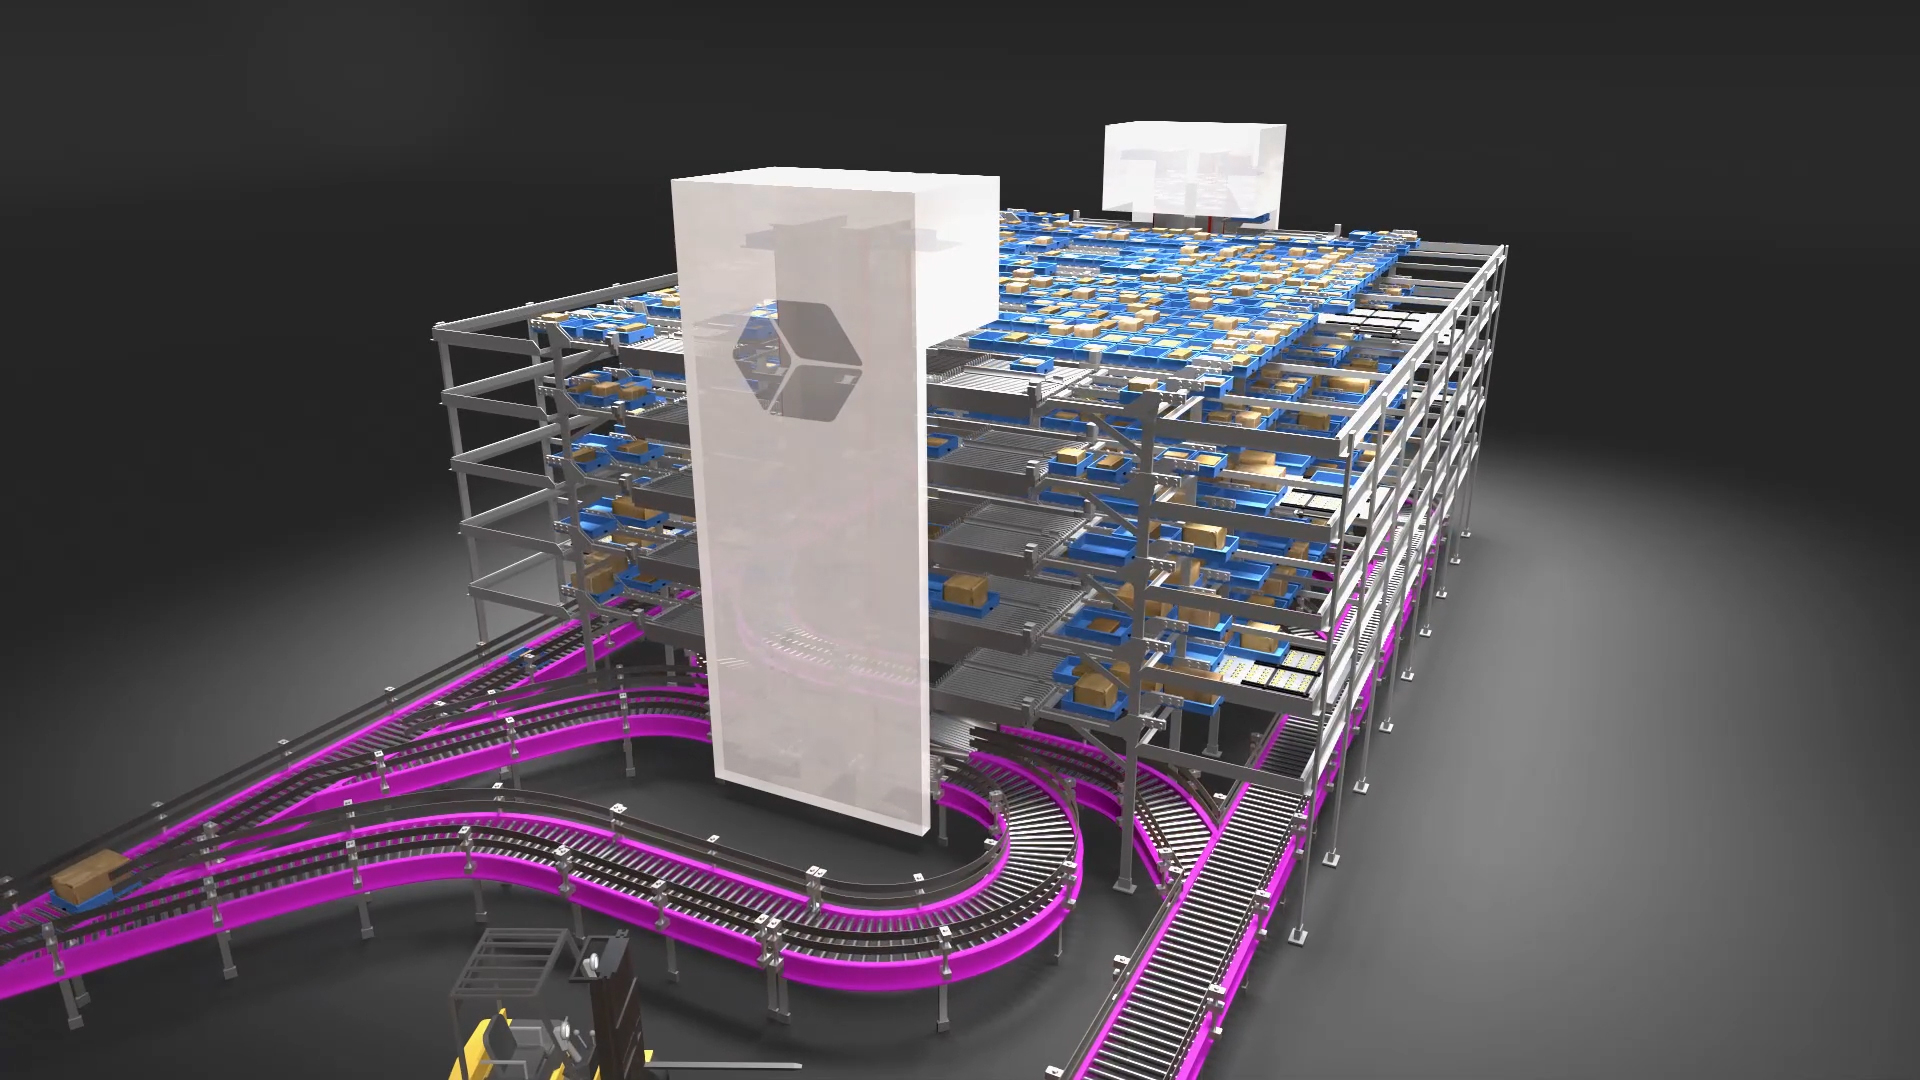 A simulation of FreeSpace Warehouse Automation technology at work.